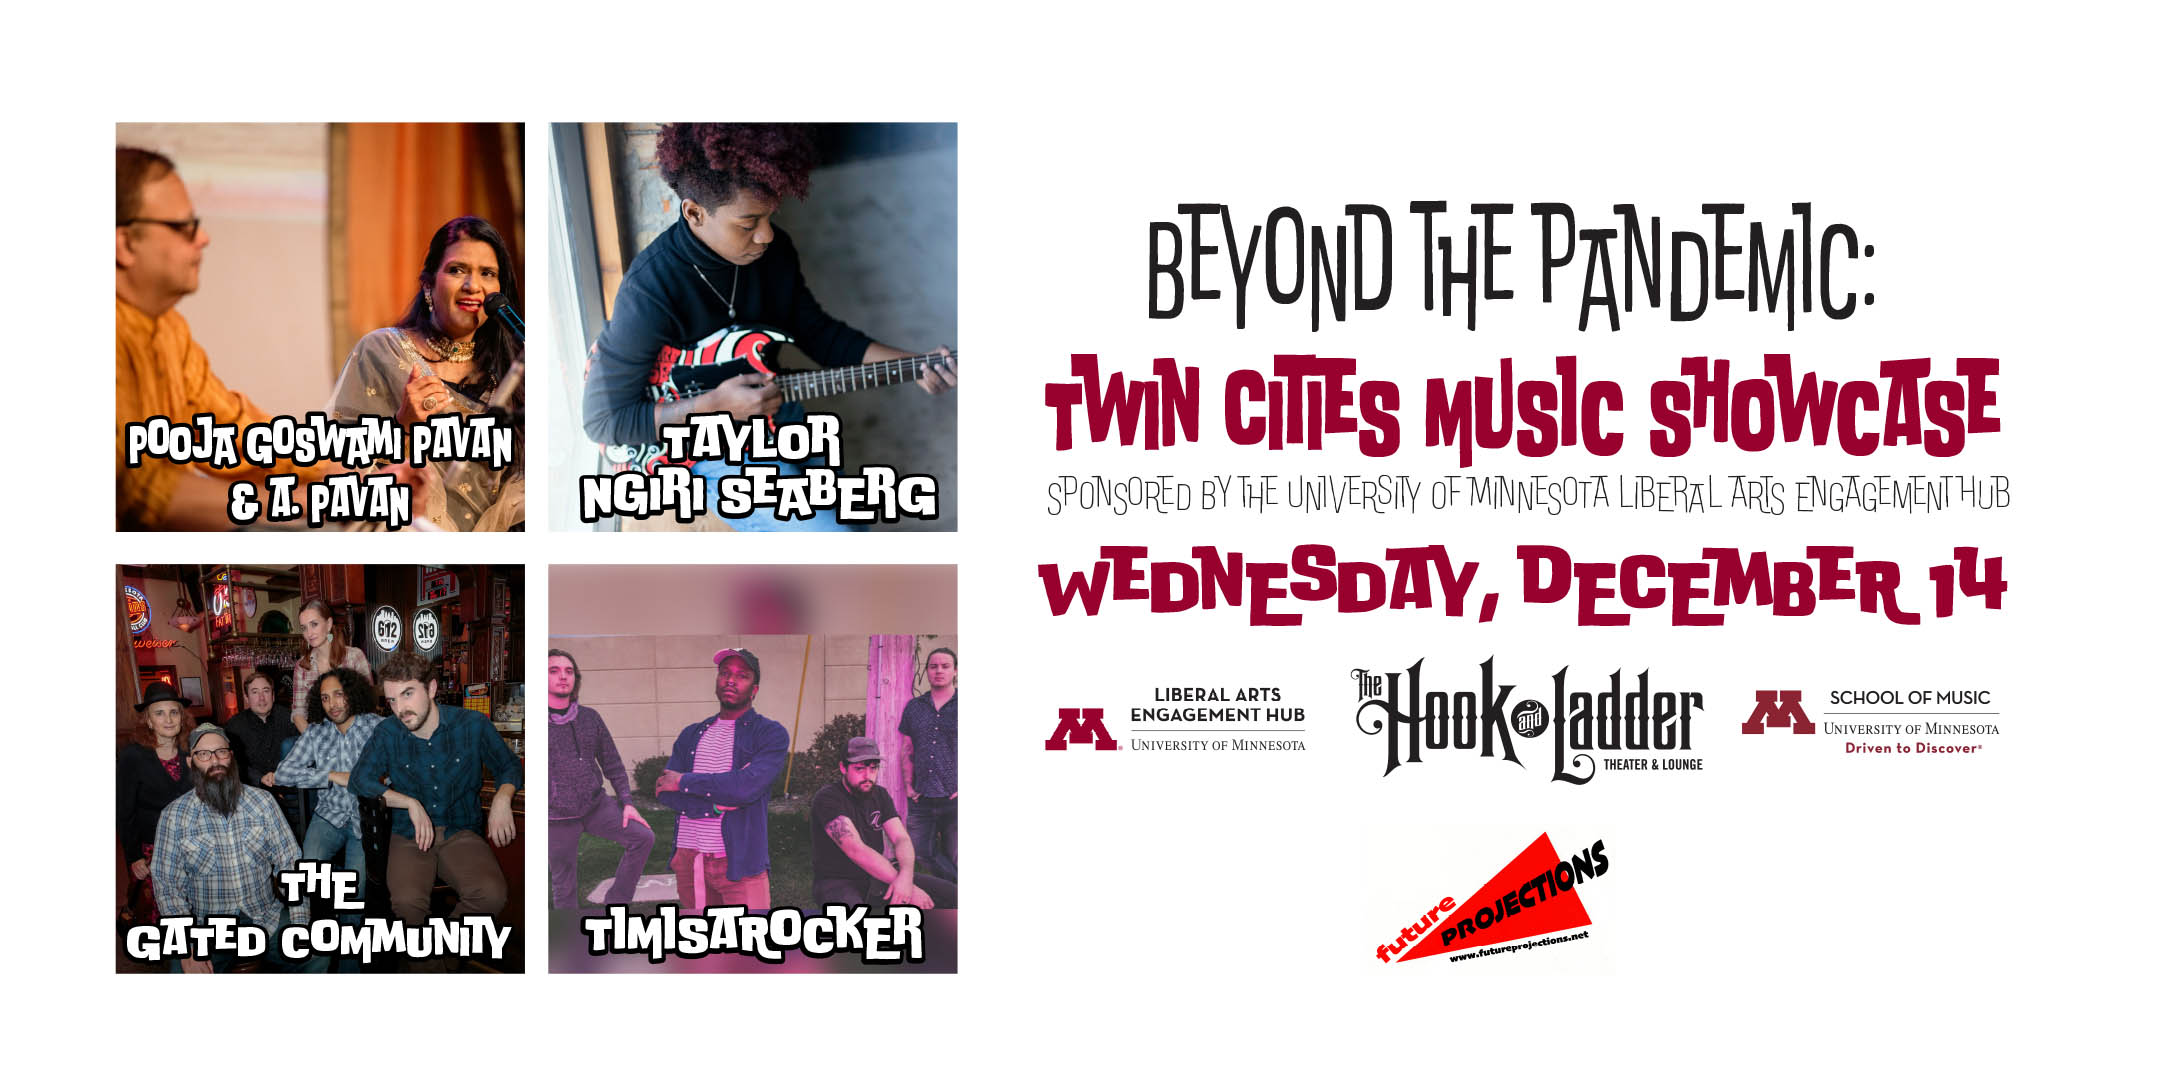 Beyond the Pandemic: Twin Cities Music Showcase Sponsored by the University of Minnesota Liberal Arts Engagement Hub and School of Music Featuring Pooja Goswami Pavan and A. Pavan, Taylor Ngiri Seaberg, The Gated Community, and TIMISAROCKER, with projection art by Future Projections Wednesday, December 14 The Hook and Ladder Theater Doors 6:30pm :: Music 7:00pm :: 21+ FREE ( Registration Recommended)